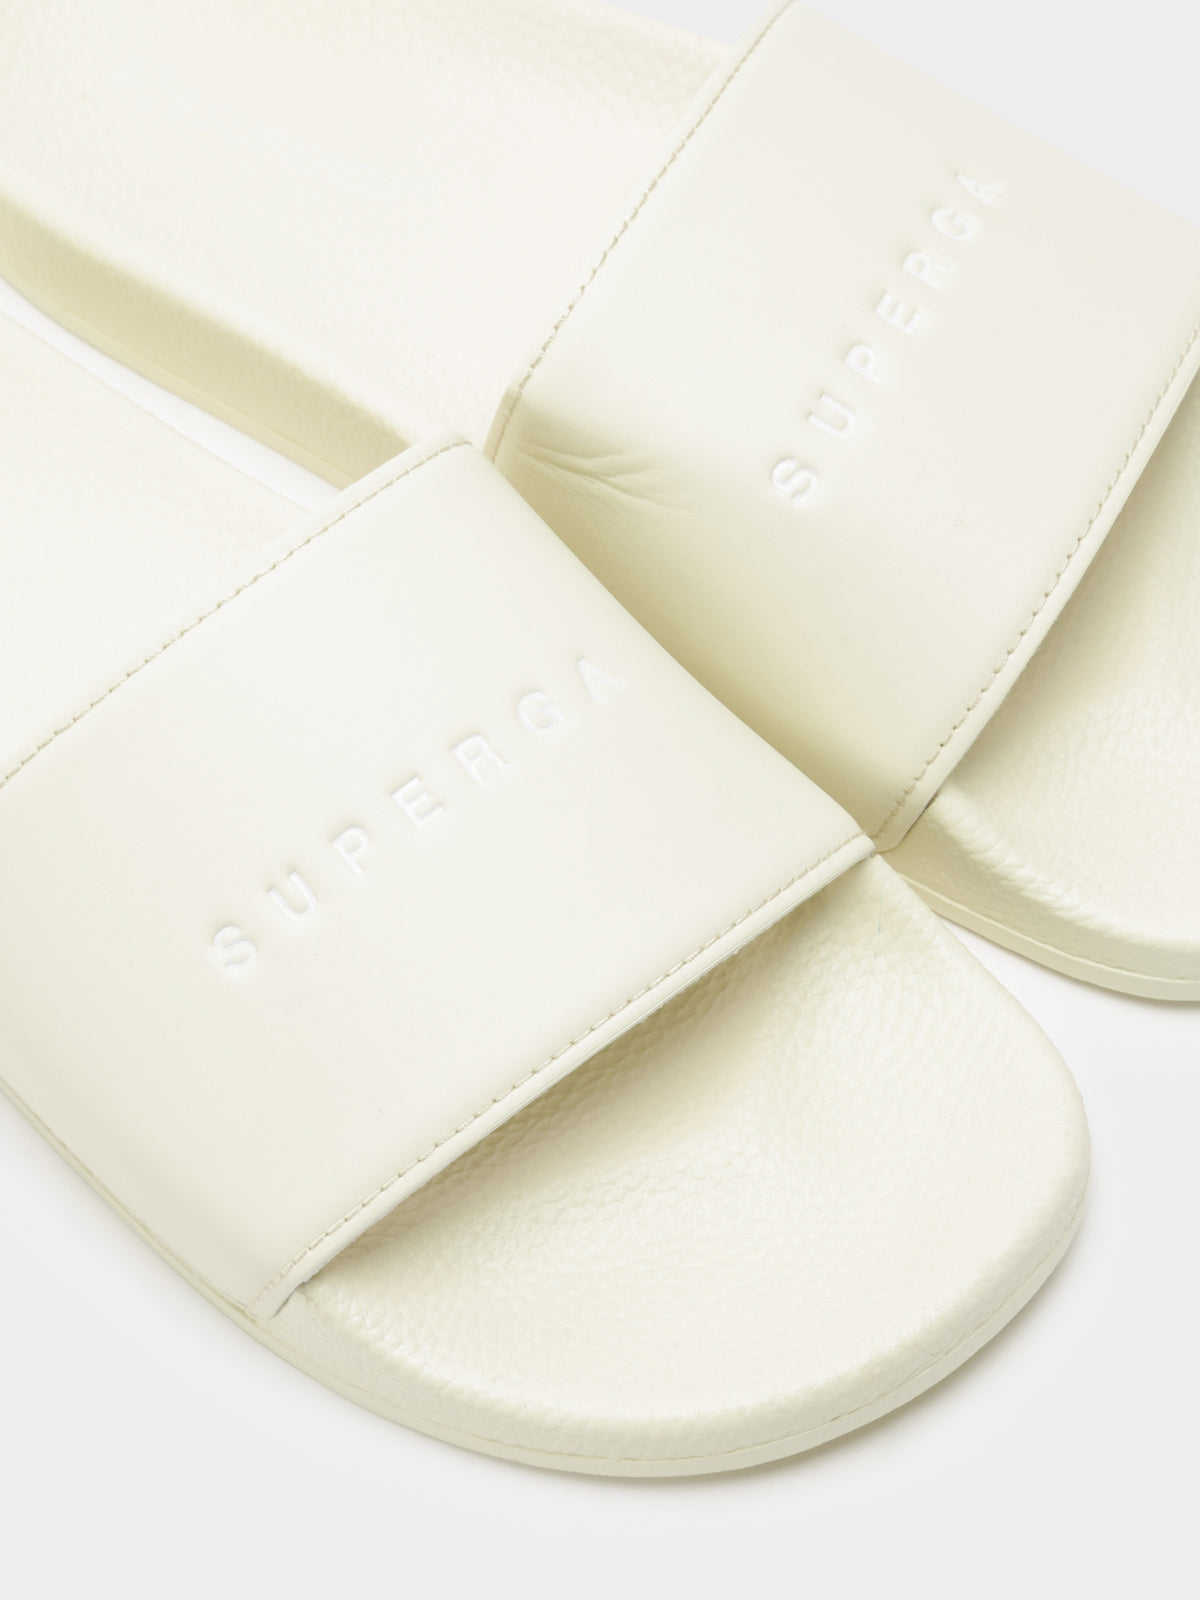 Womens 1908 Polysoft Slides in Off White